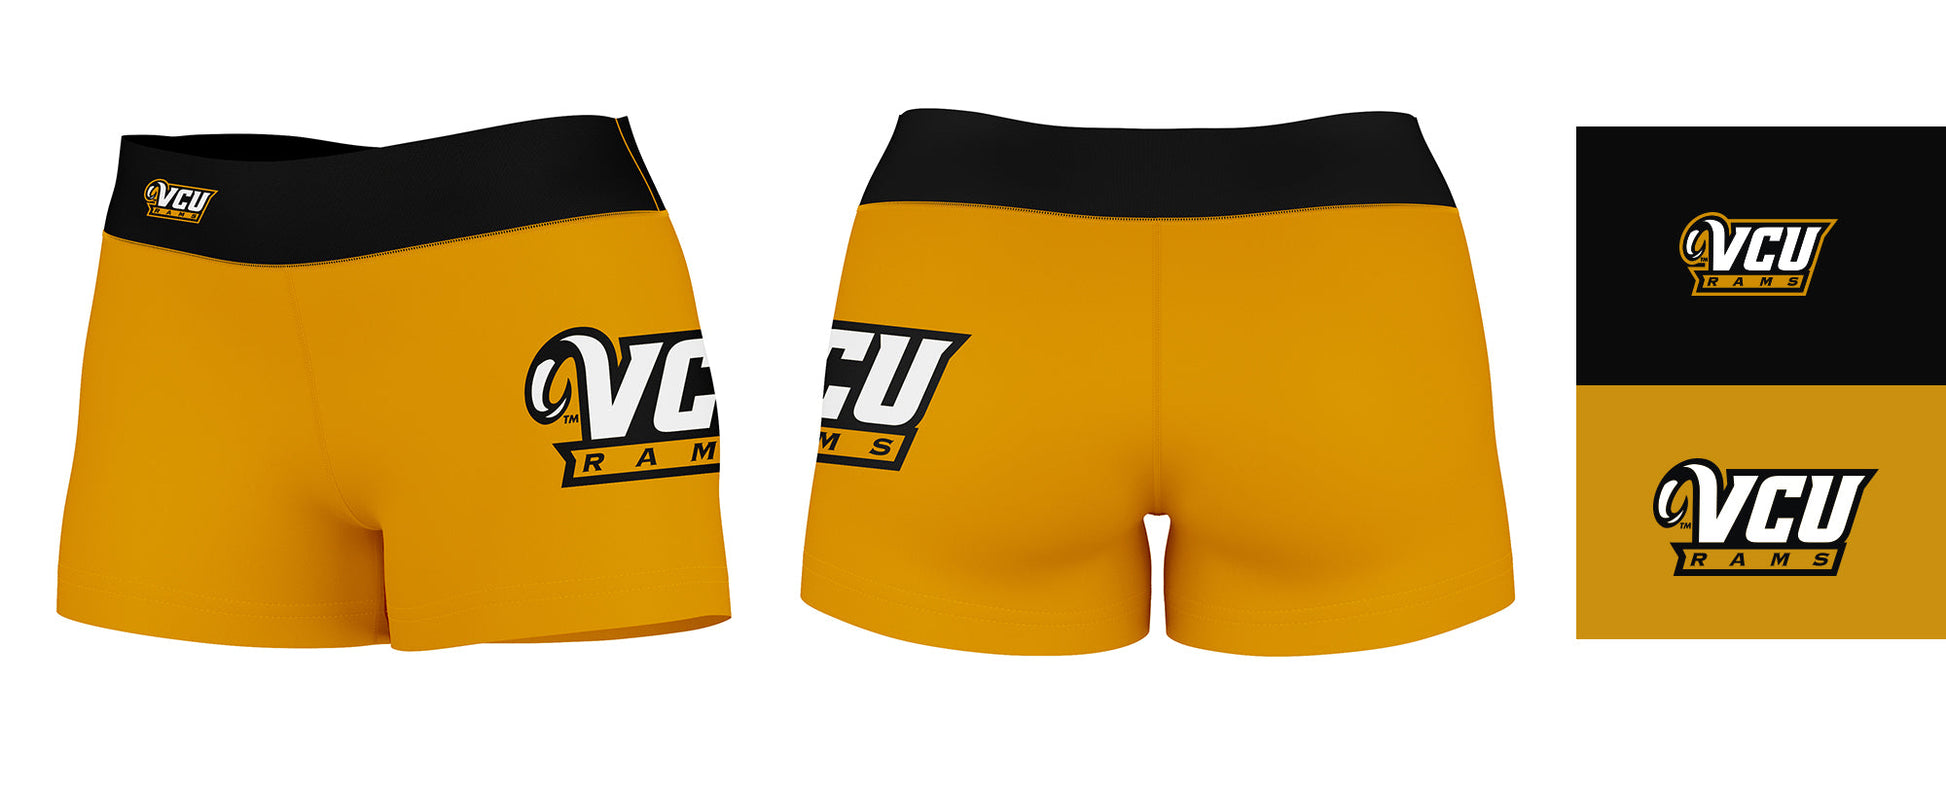 VCU Rams Virginia Commonwealth Logo on Thigh & Waistband Maroon Gold Black Yoga Booty Workout Shorts 3.75 Inseam - Vive La F̻te - Online Apparel Store